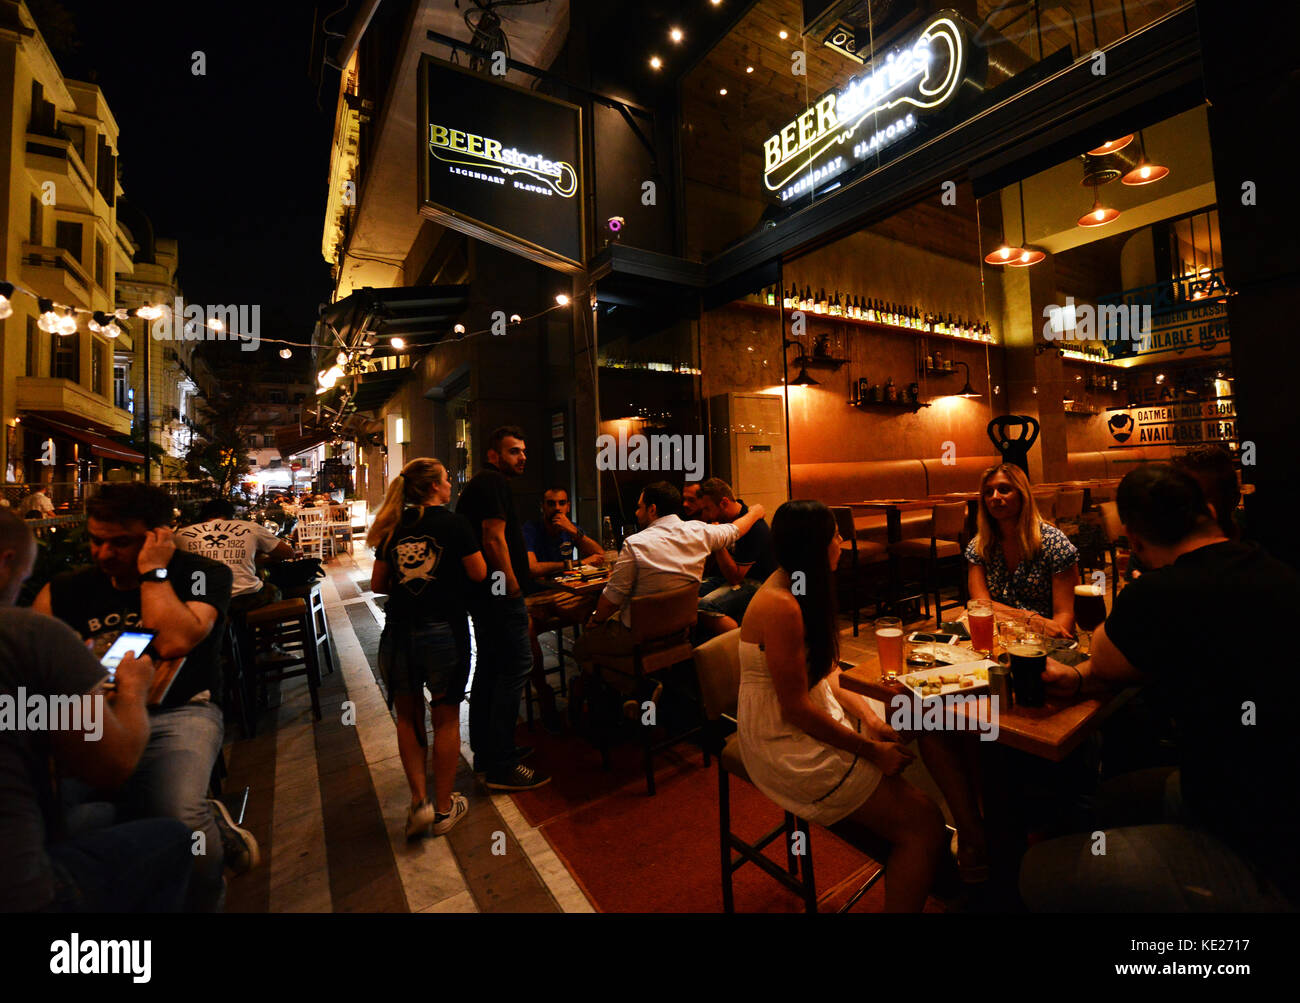 The Beer stories bar in Thessaloniki, Greece. Stock Photo